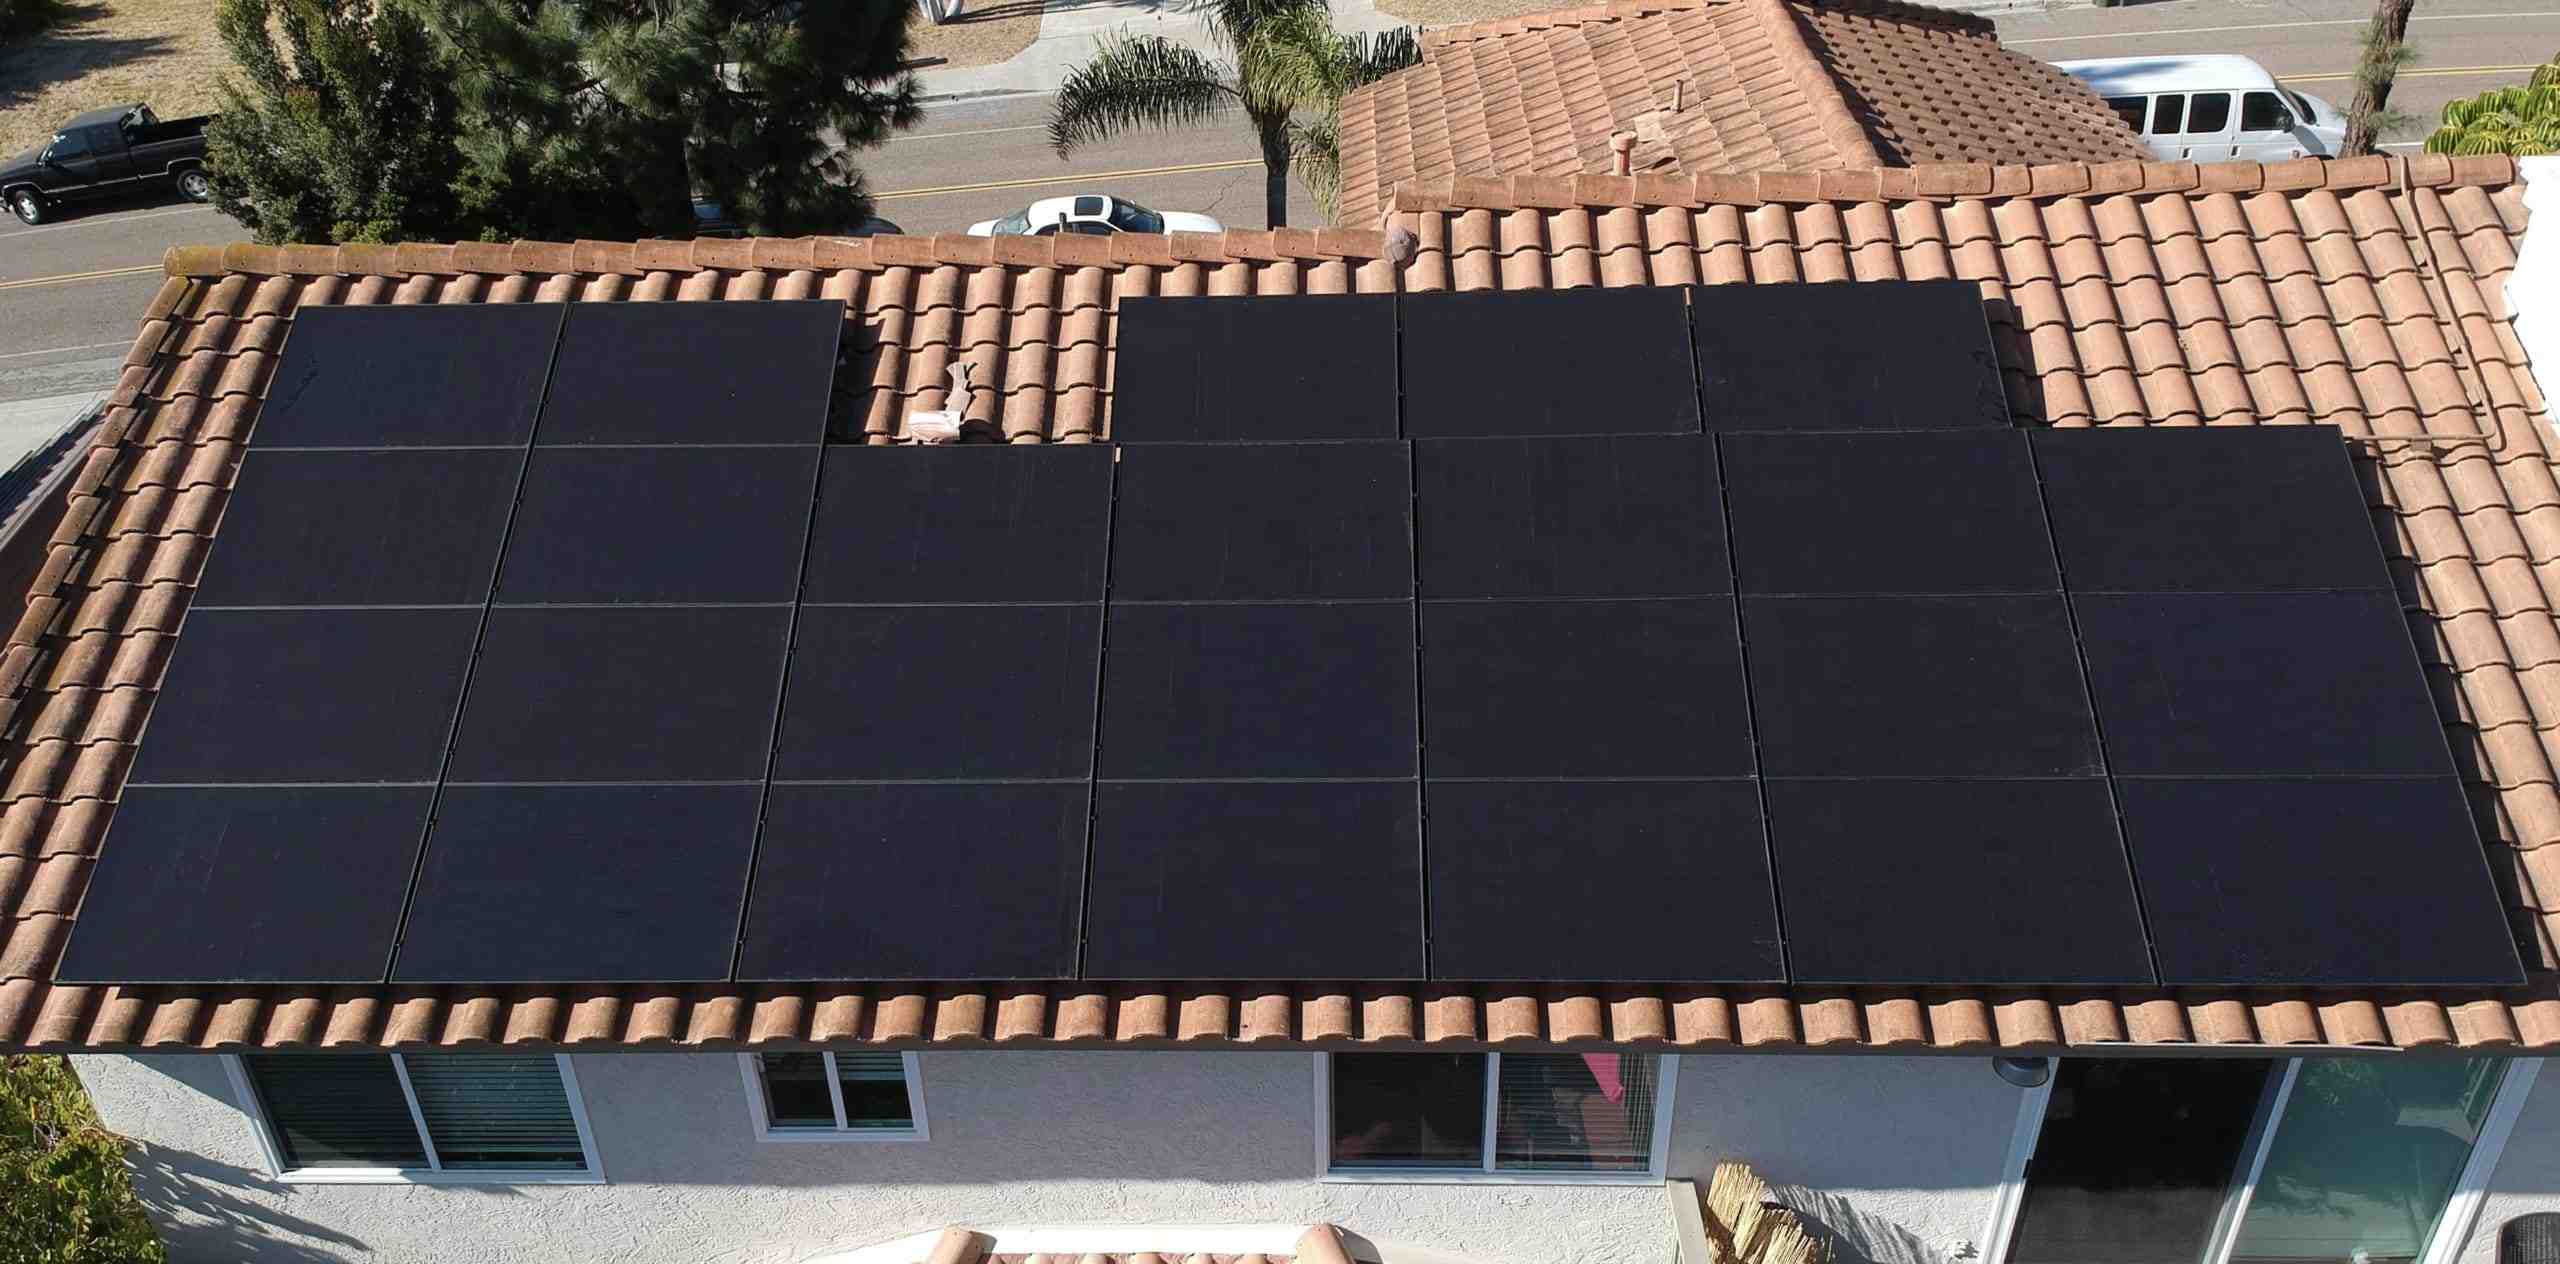 Are solar installers happy?